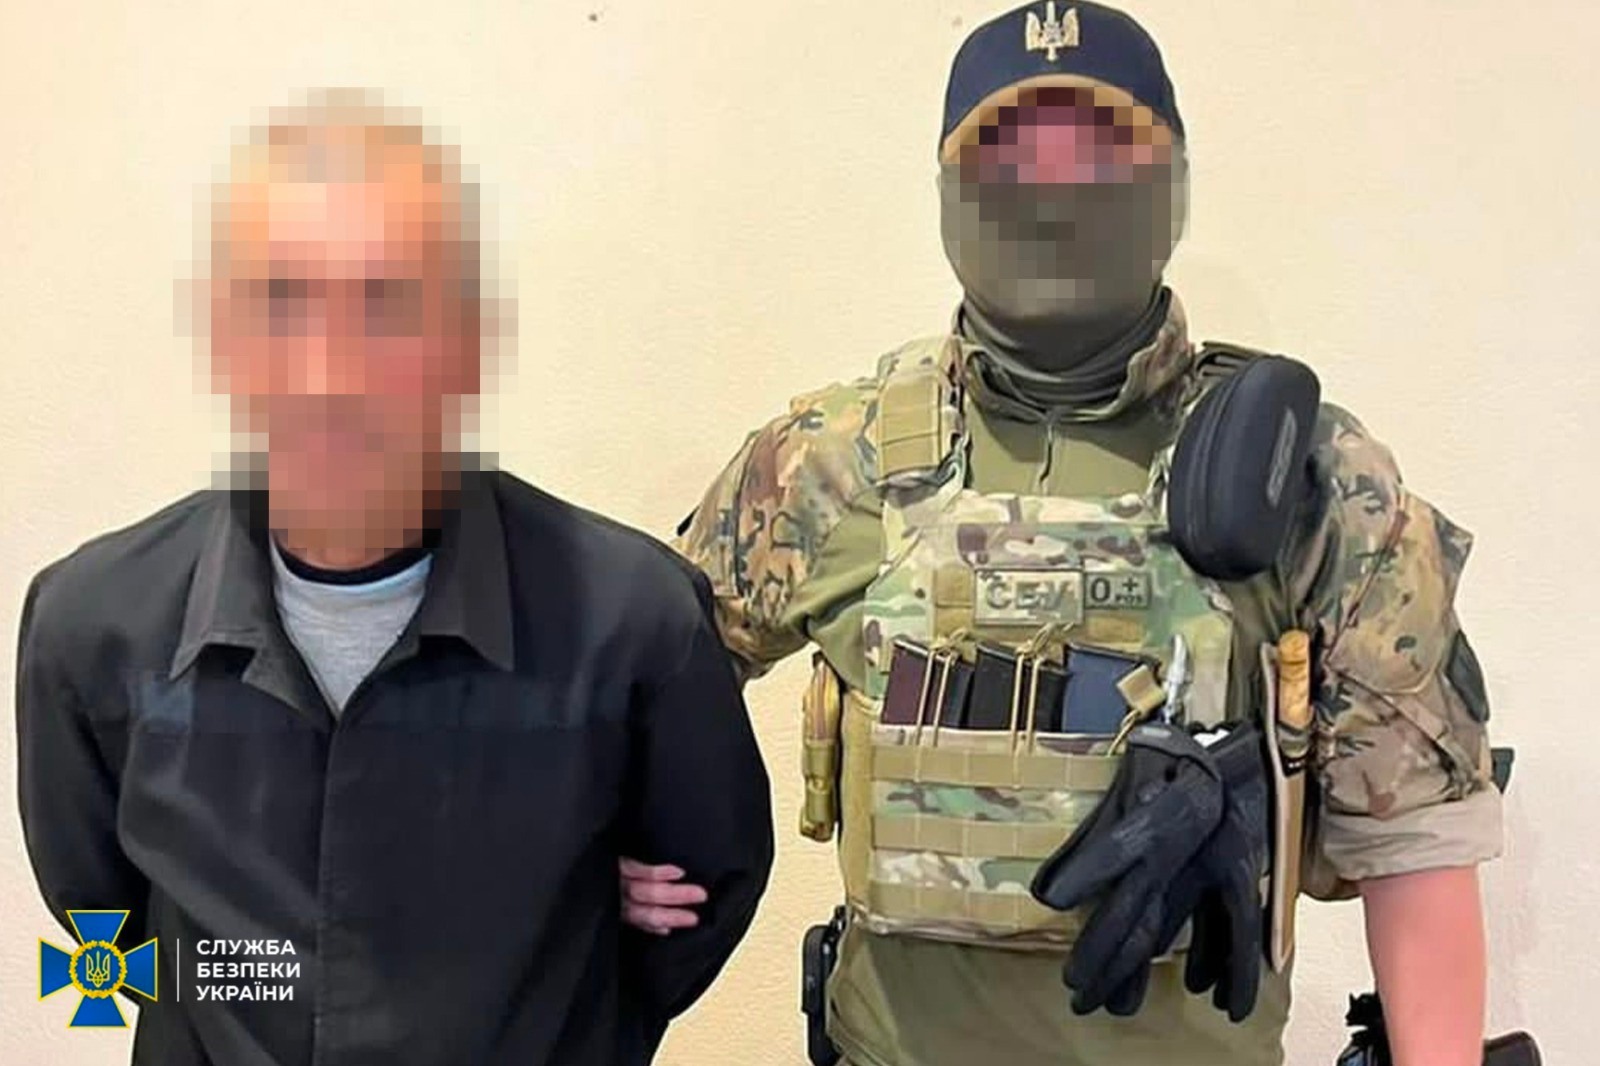 SBU nabs another Russian accomplice in Kharkiv for cooperating with Russian forces